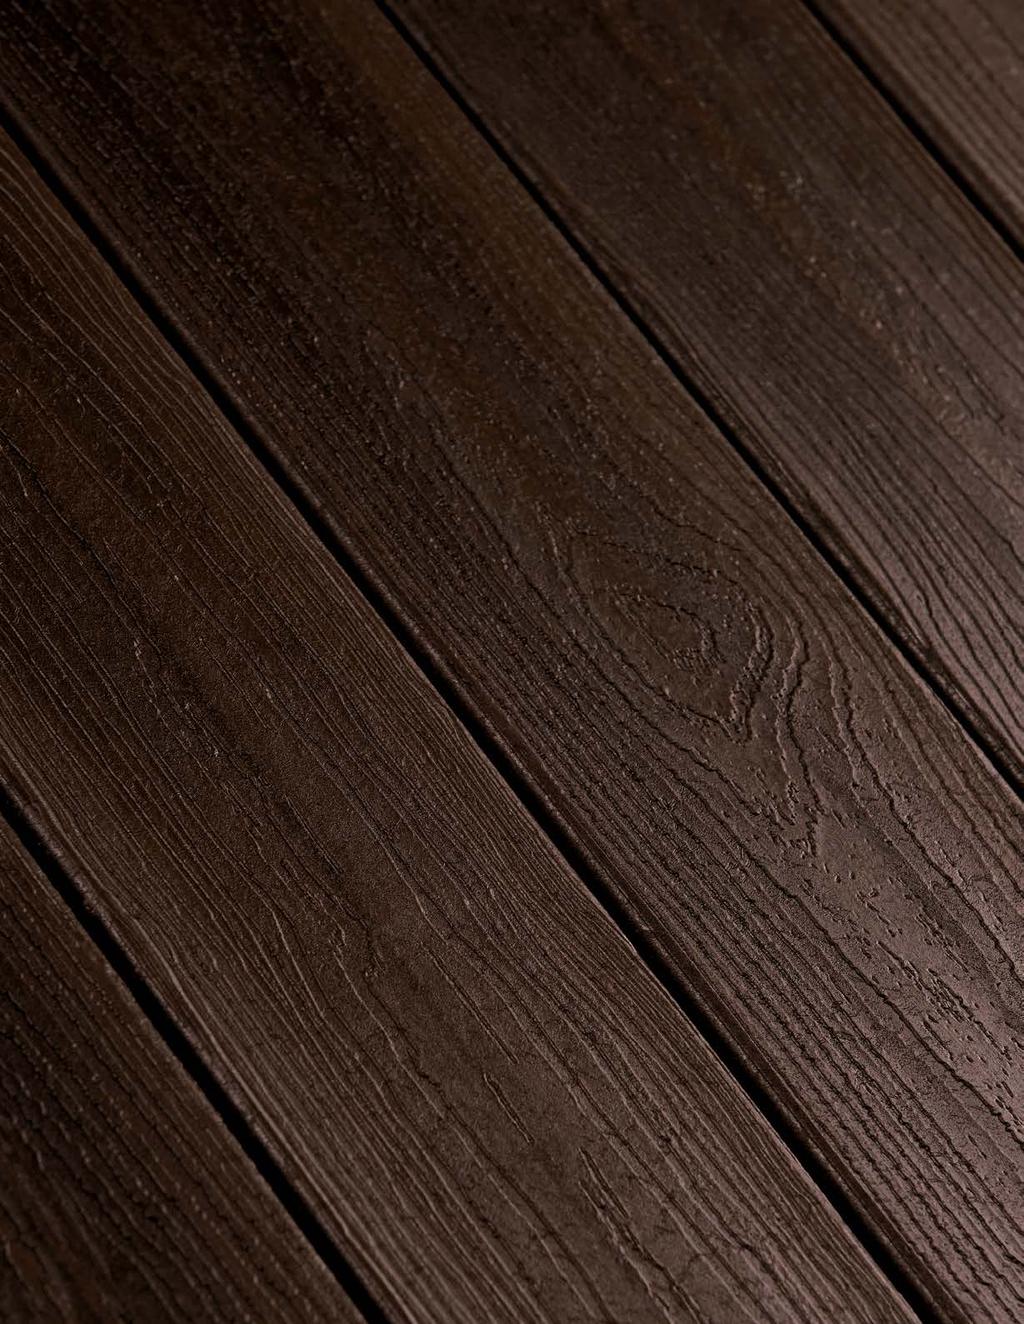 Envision s compression molding process creates the T.R.U.E. look of real wood with natural colors, random patterns and unique grain beauty.